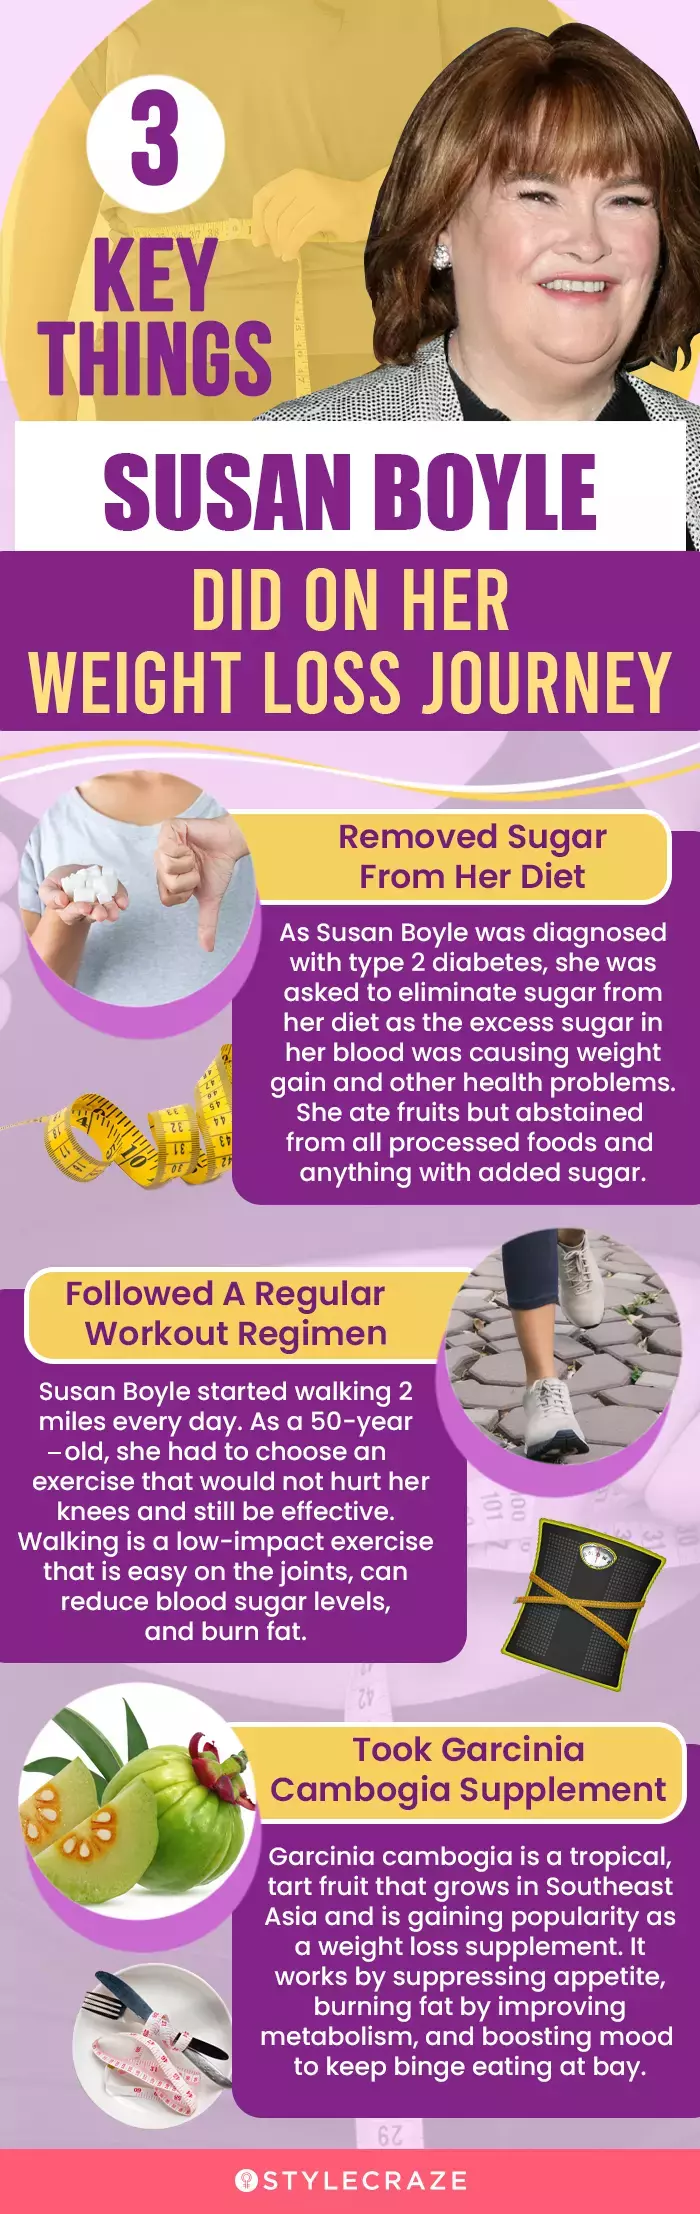 3 key things susan boyle did on her weight loss journey (infographic)